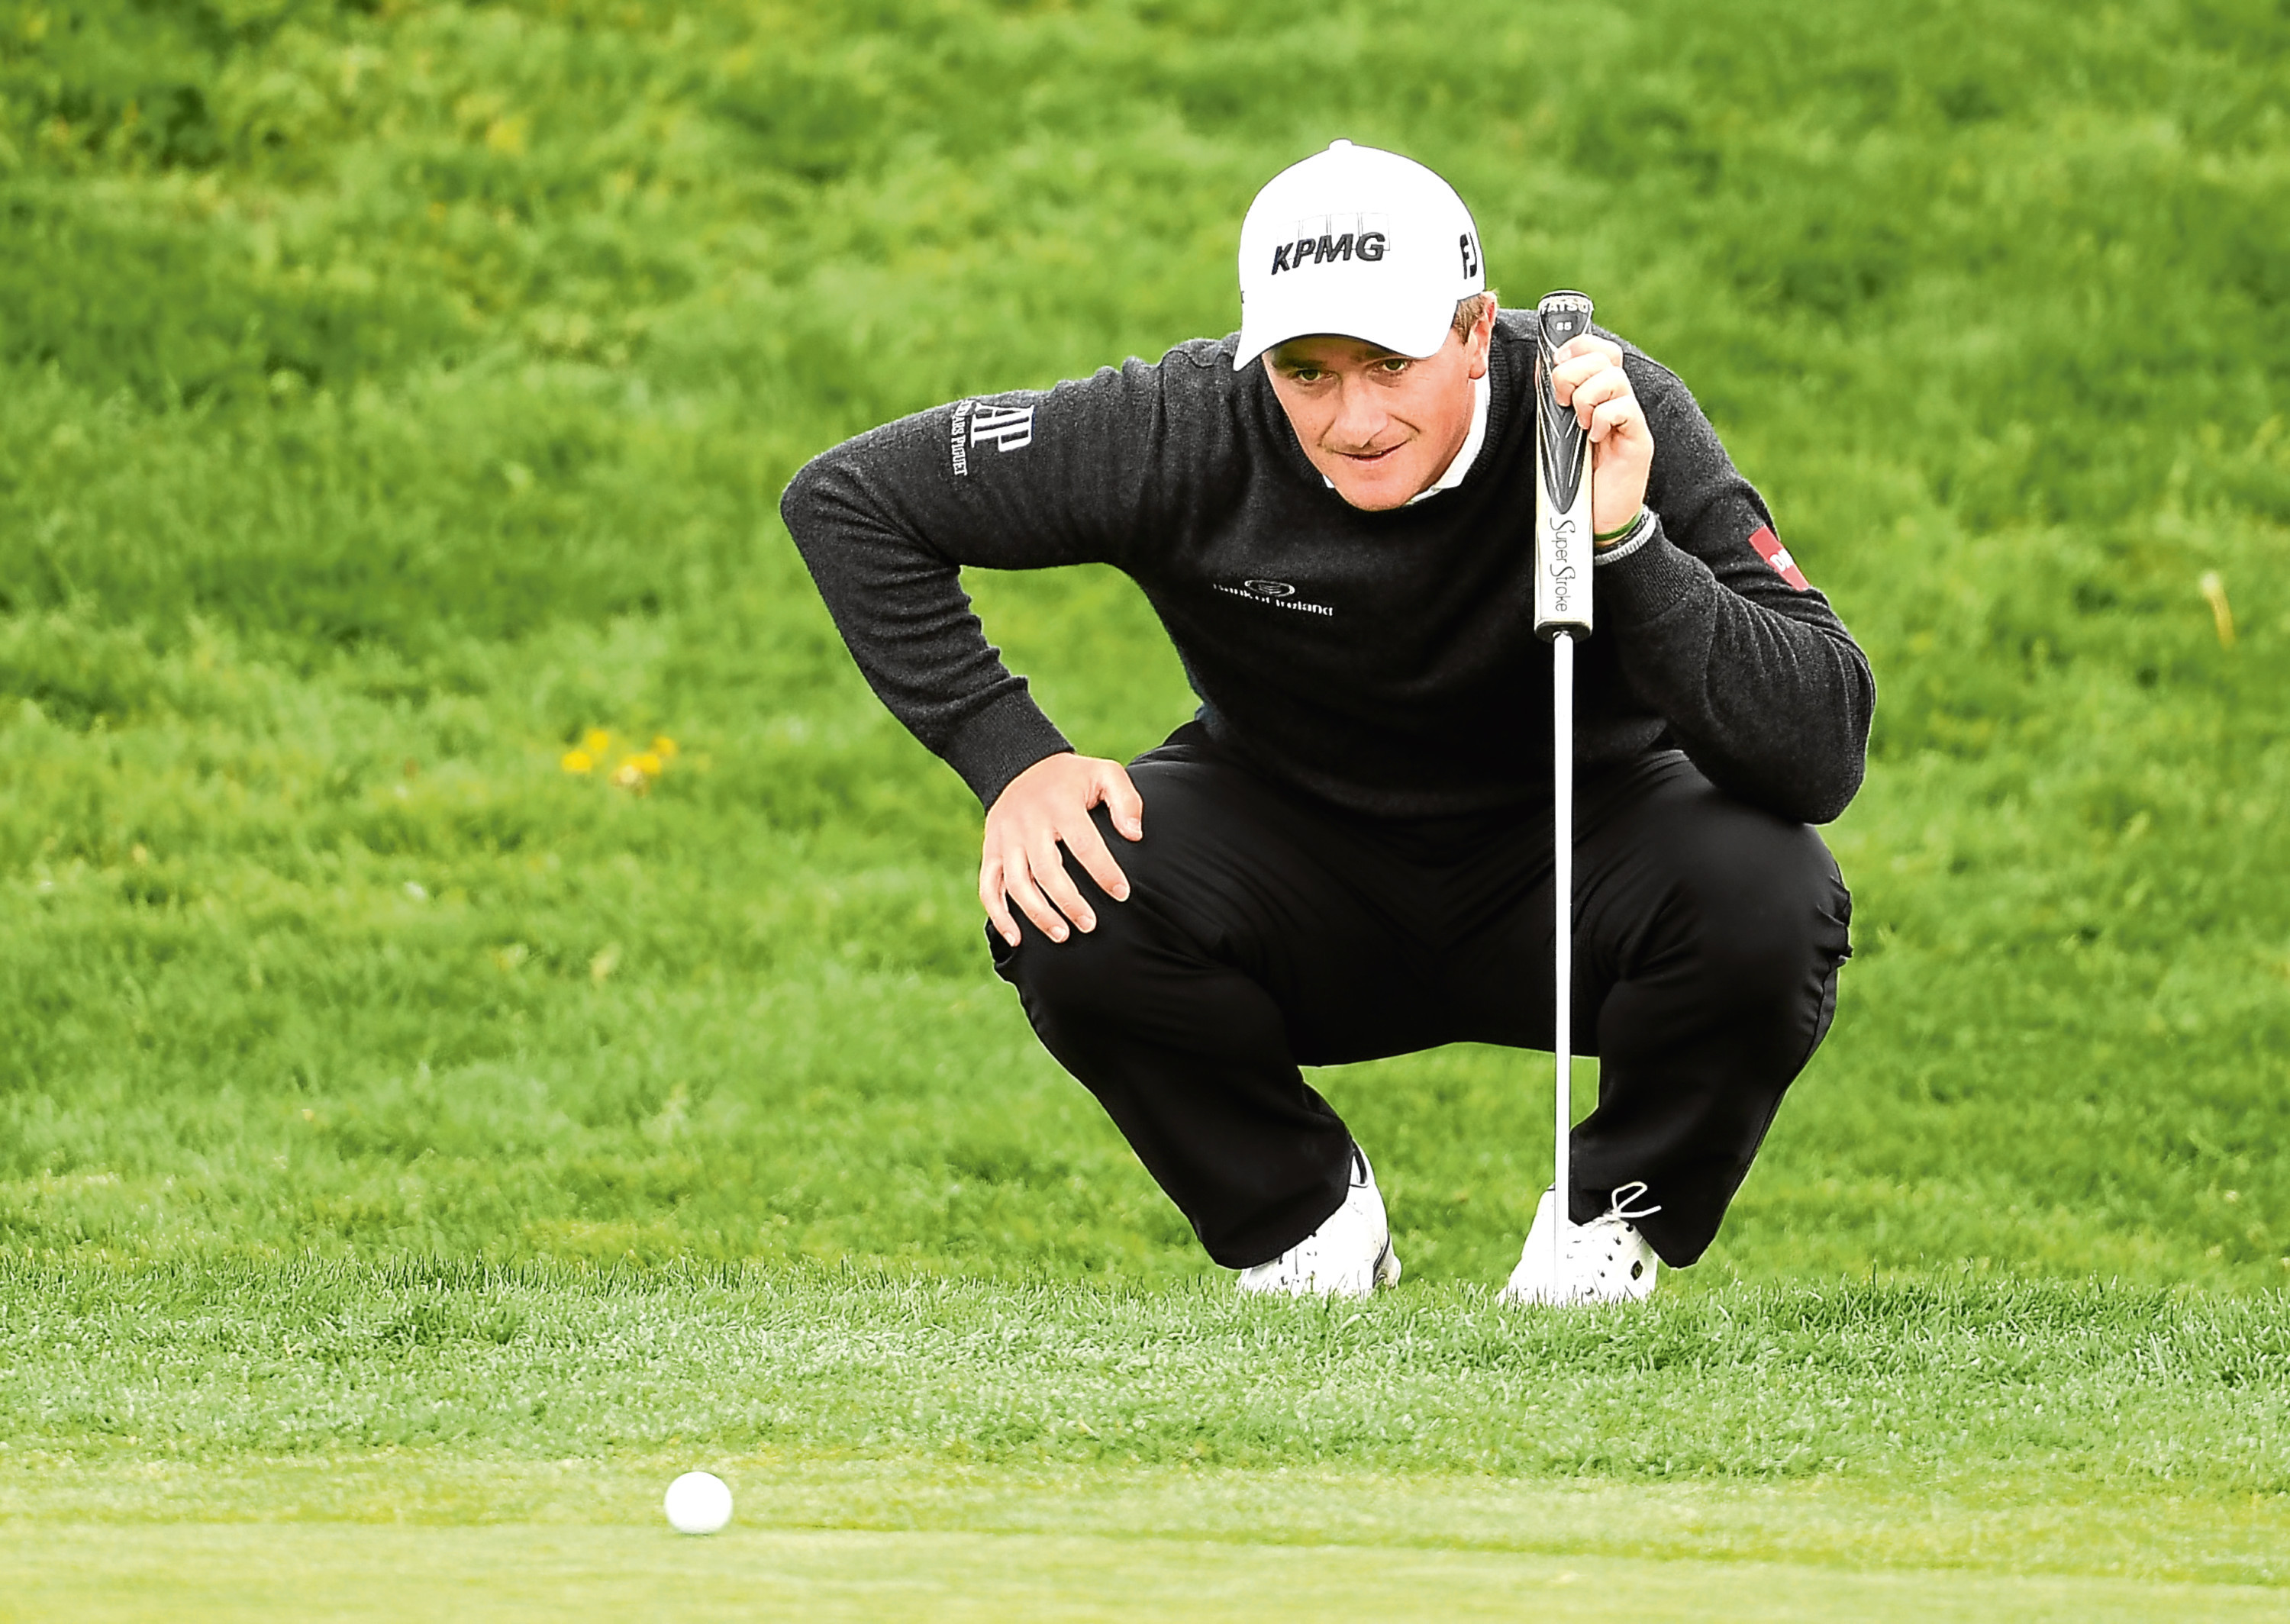 MADRID, SPAIN - APRIL 13:  Paul Dunne of Ireland lines up his putt on the 8th green during day two of the Open de Espana at Centro Nacional de Golf on April 13, 2018 in Madrid, Spain.  (Photo by Ross Kinnaird/Getty Images)